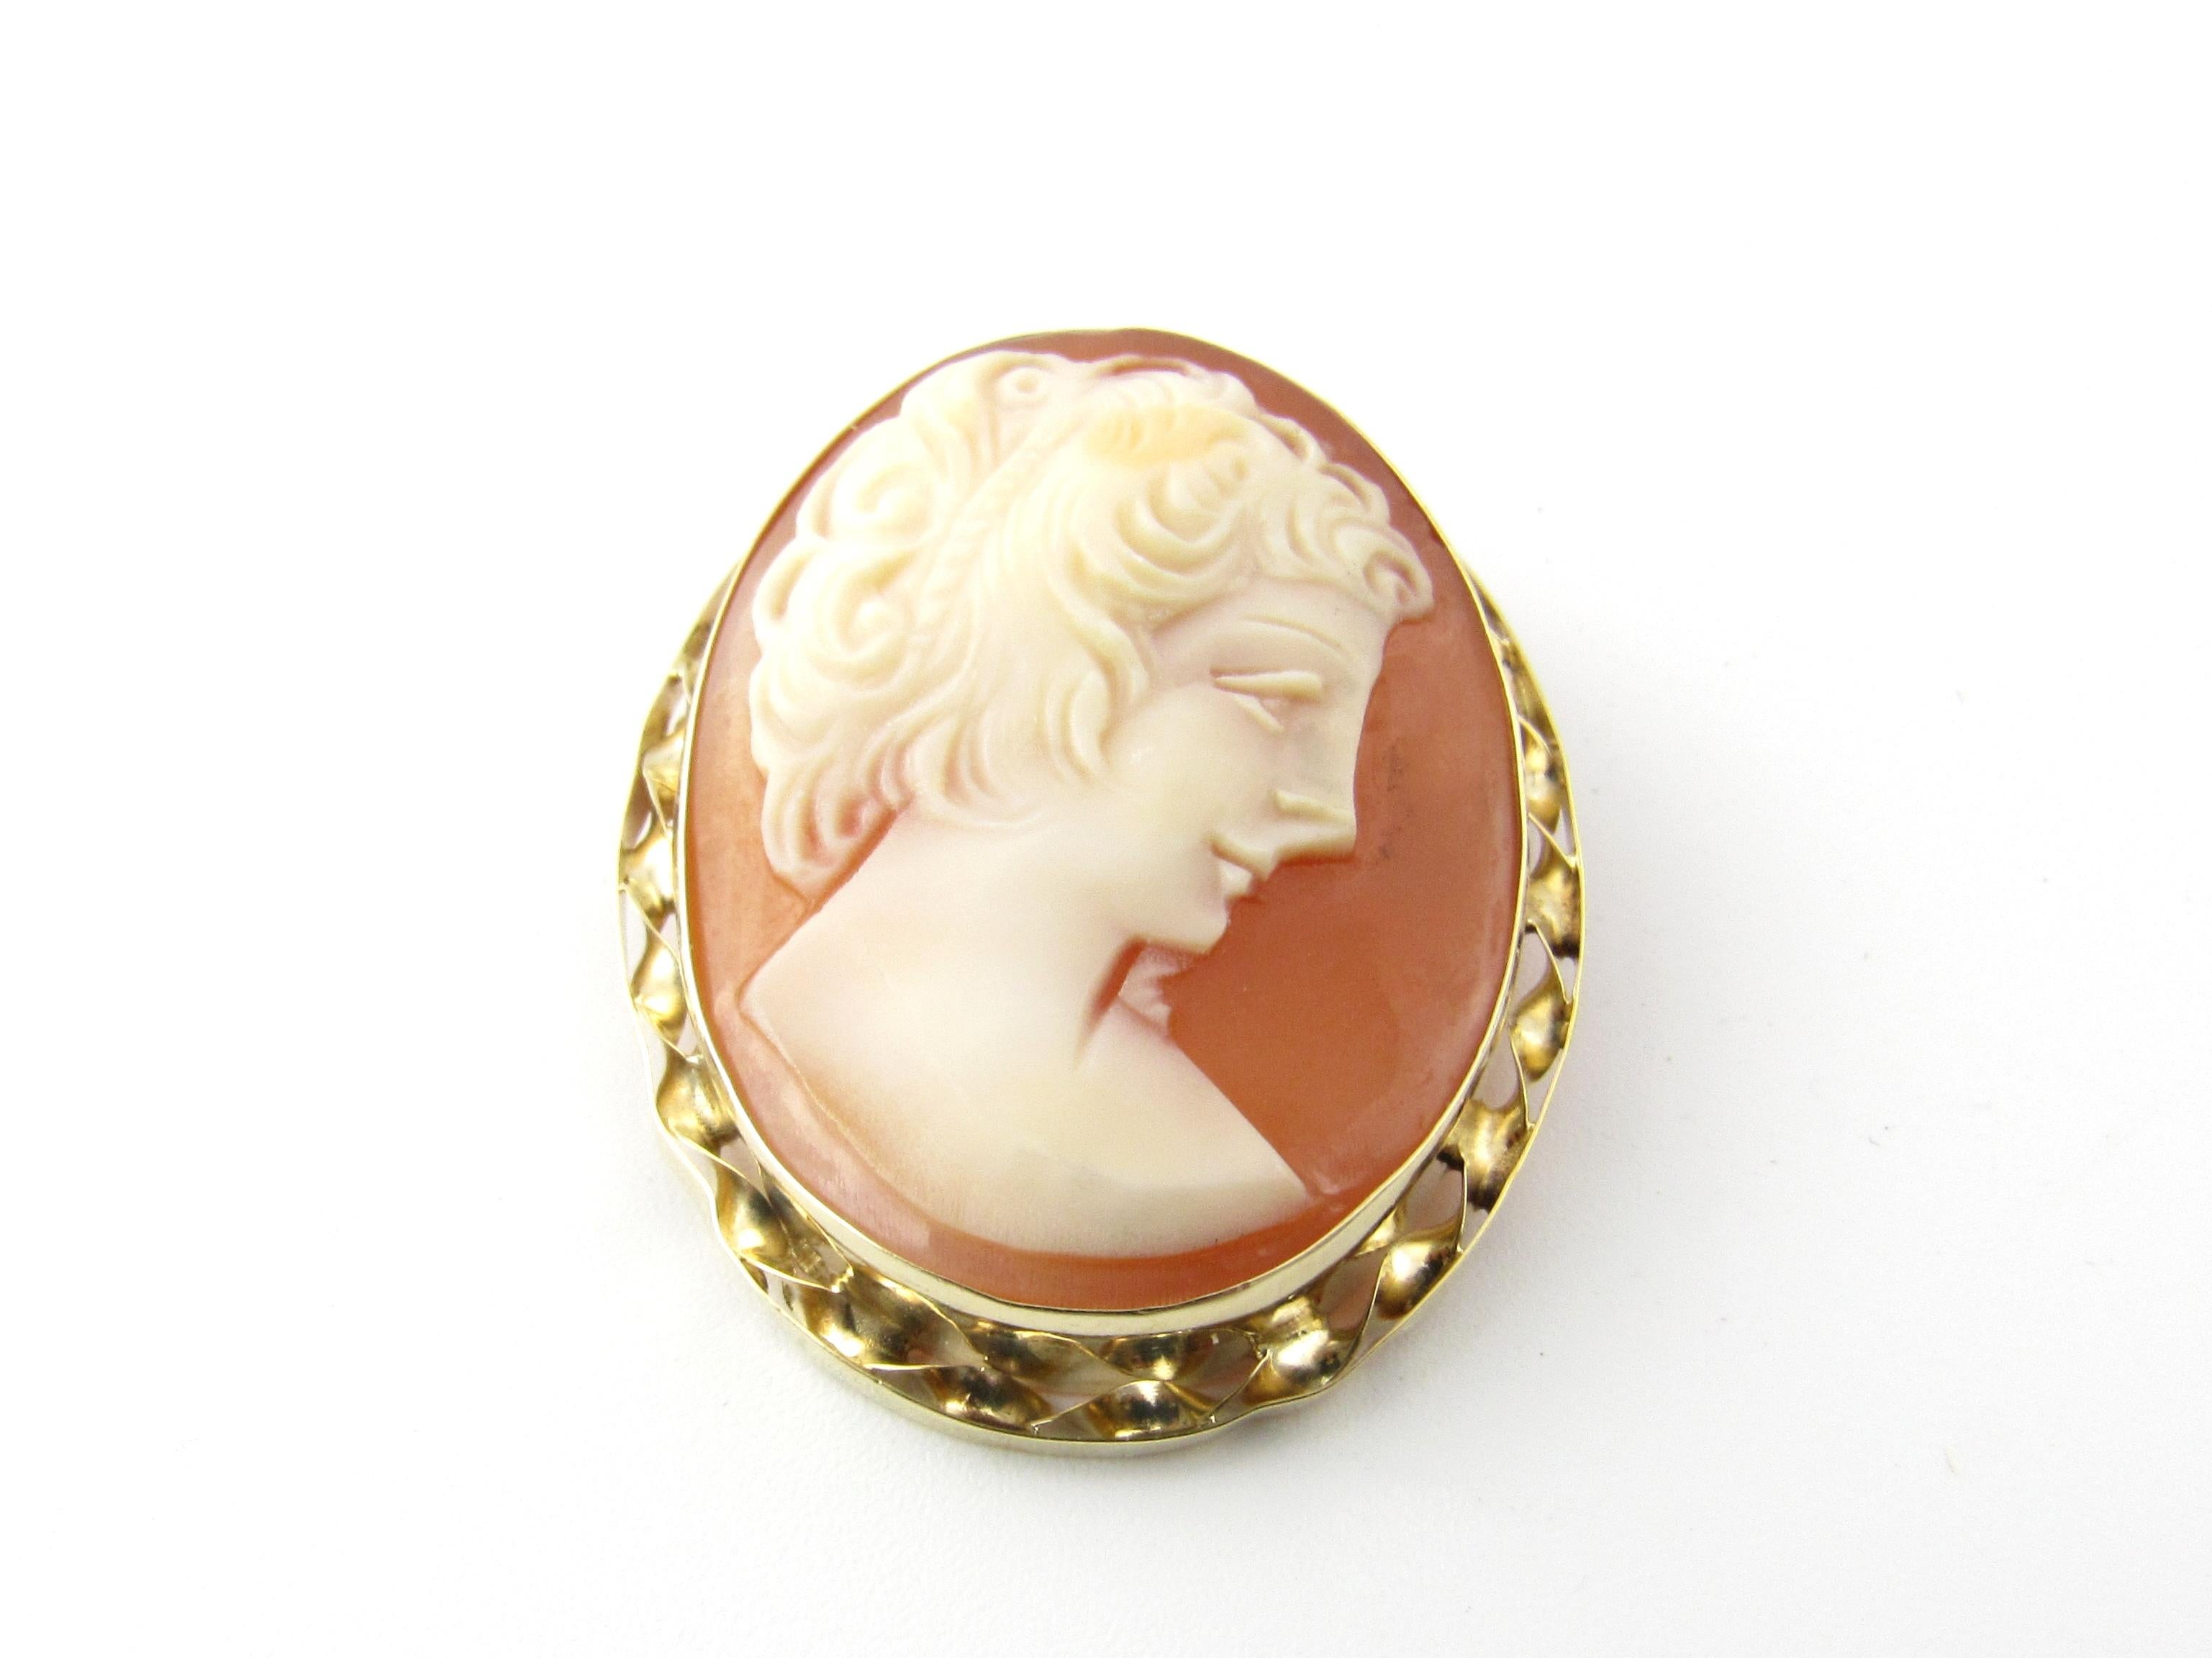 14 Karat Yellow Gold Cameo Pendant/Brooch-

This lovely cameo features a lovely lady in profile framed in beautifully detailed 14K yellow gold.  Can be worn as a pendant or a brooch.

Size:  34 mm x 27 mm  

Weight:  4.2 dwt. /  6.6 gr. 

Stamped: